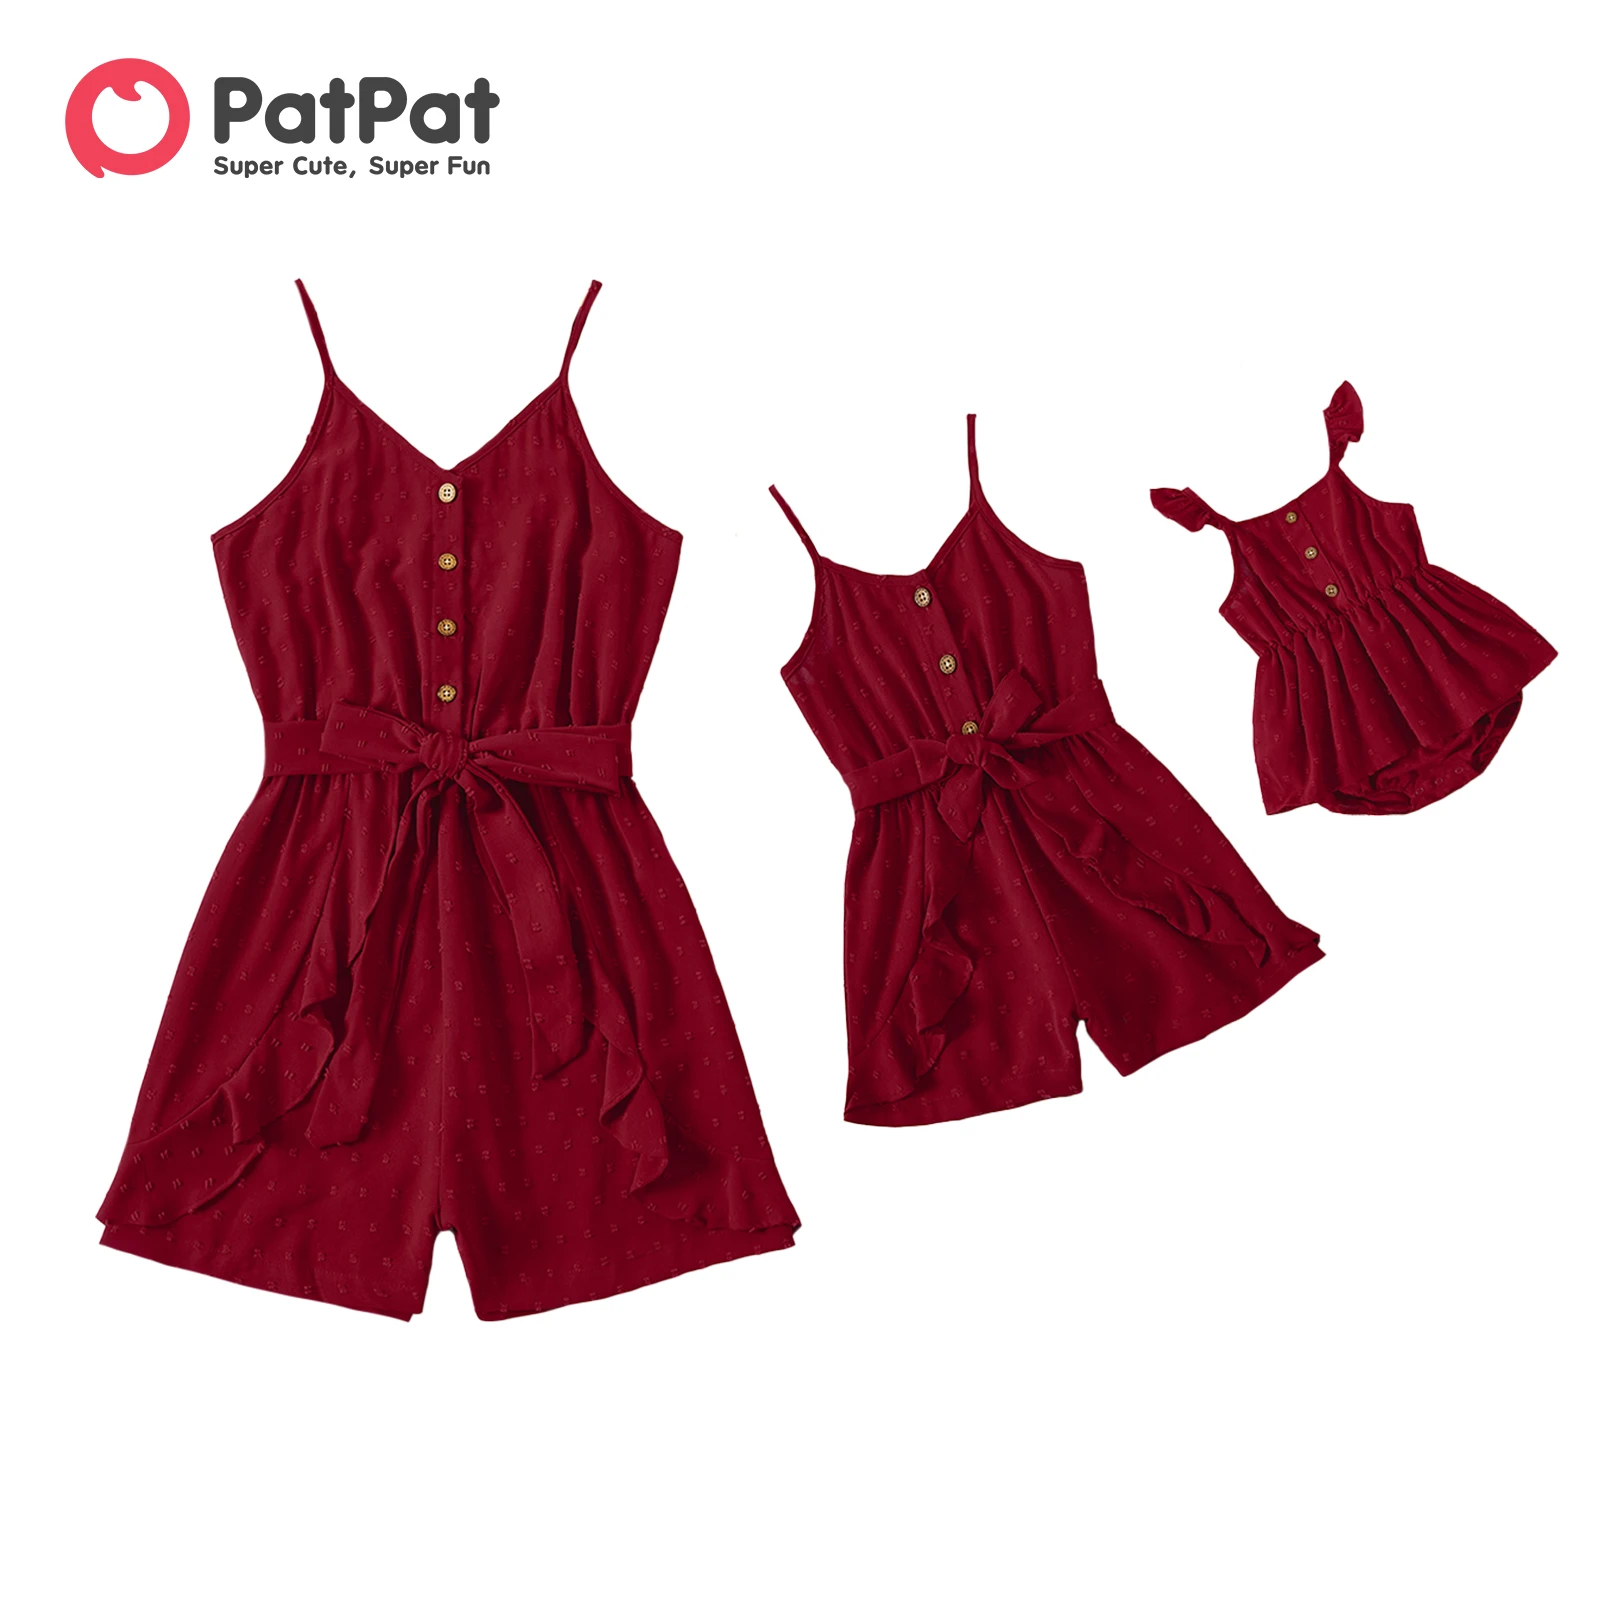 

PatPat Mommy and Me Red Swiss Dot Ruffle Trim Belted Cami Rompers